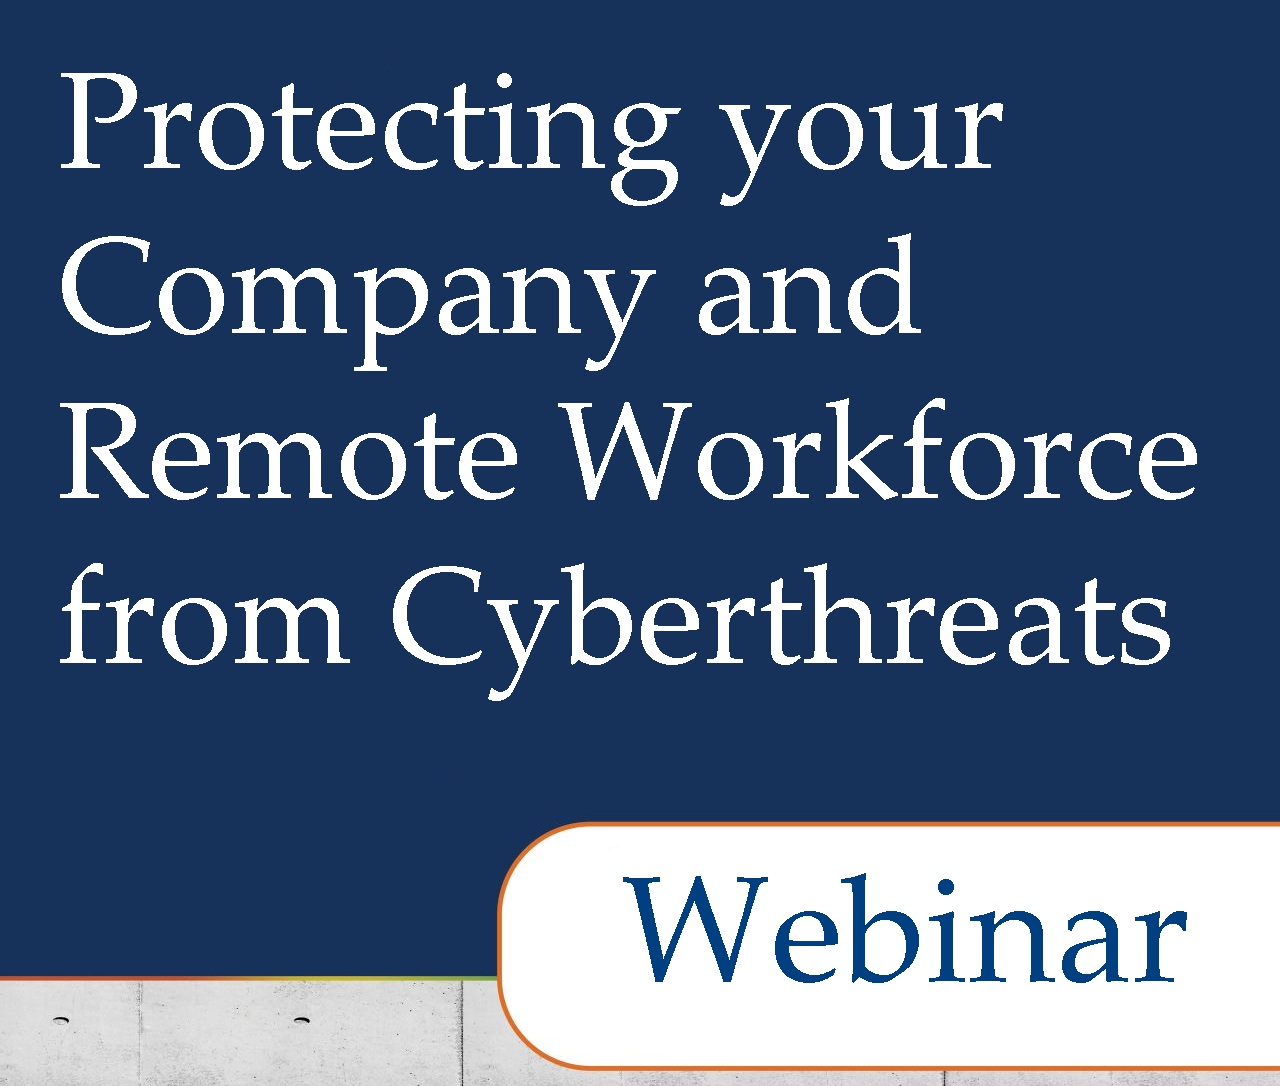 Protecting your Company and Remote Workforce from Cyberthreats Webinar